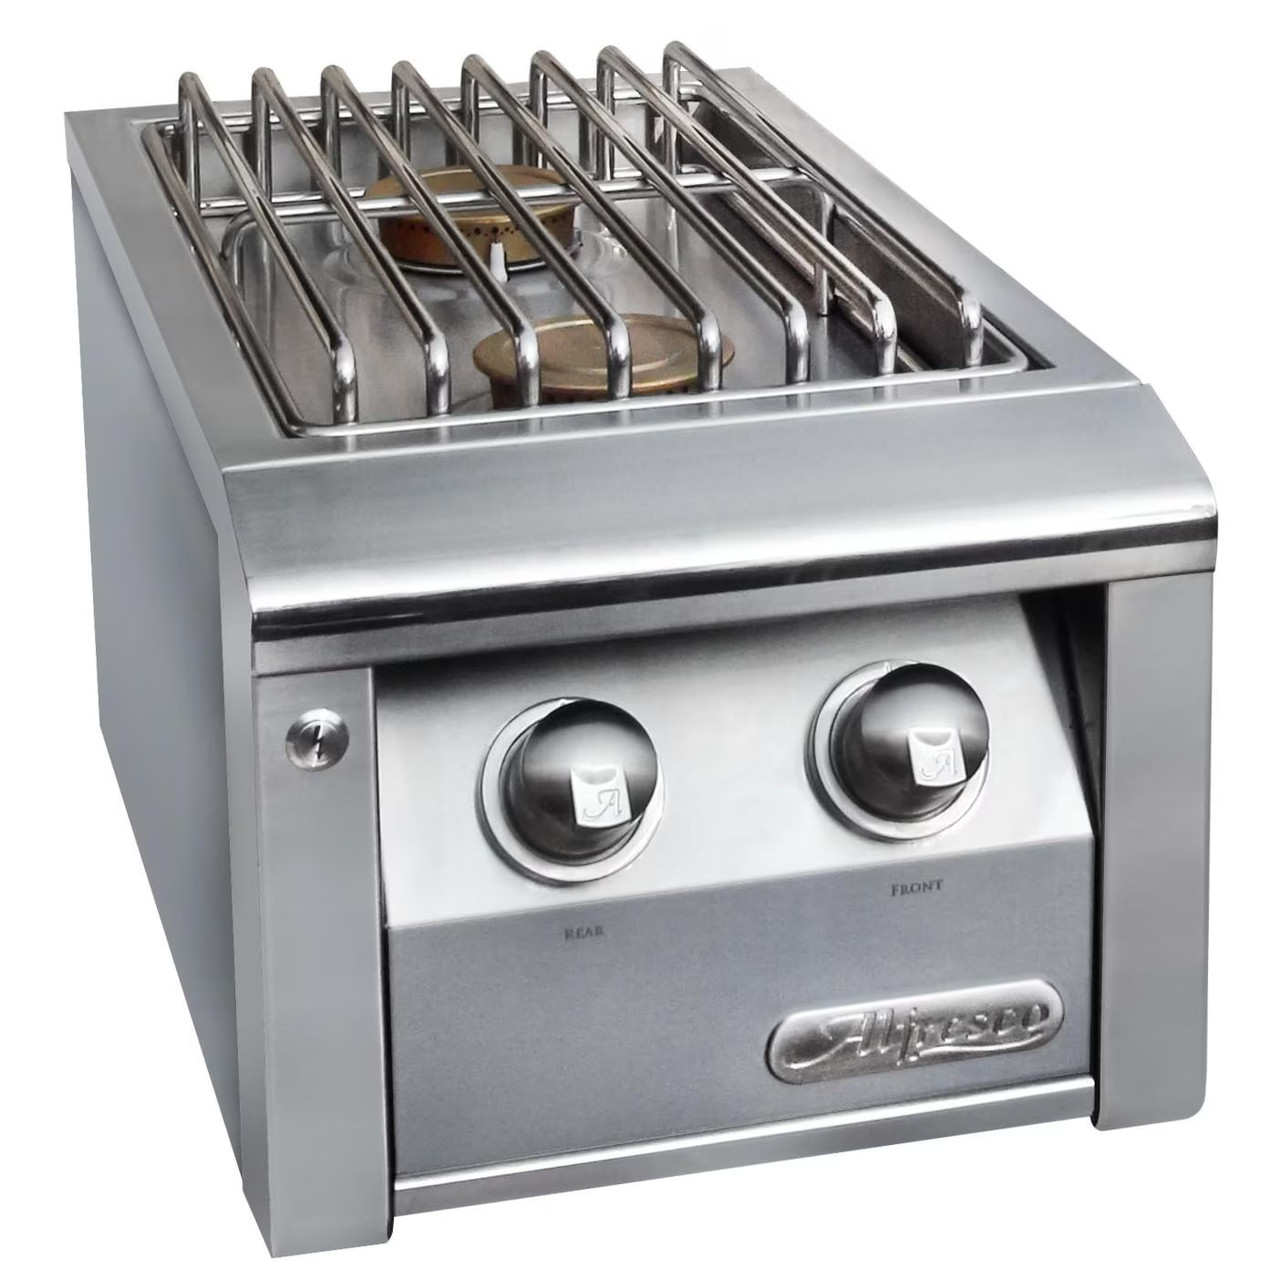 Alfresco AXESB2NG Built-In Natural Gas Double Side Burner